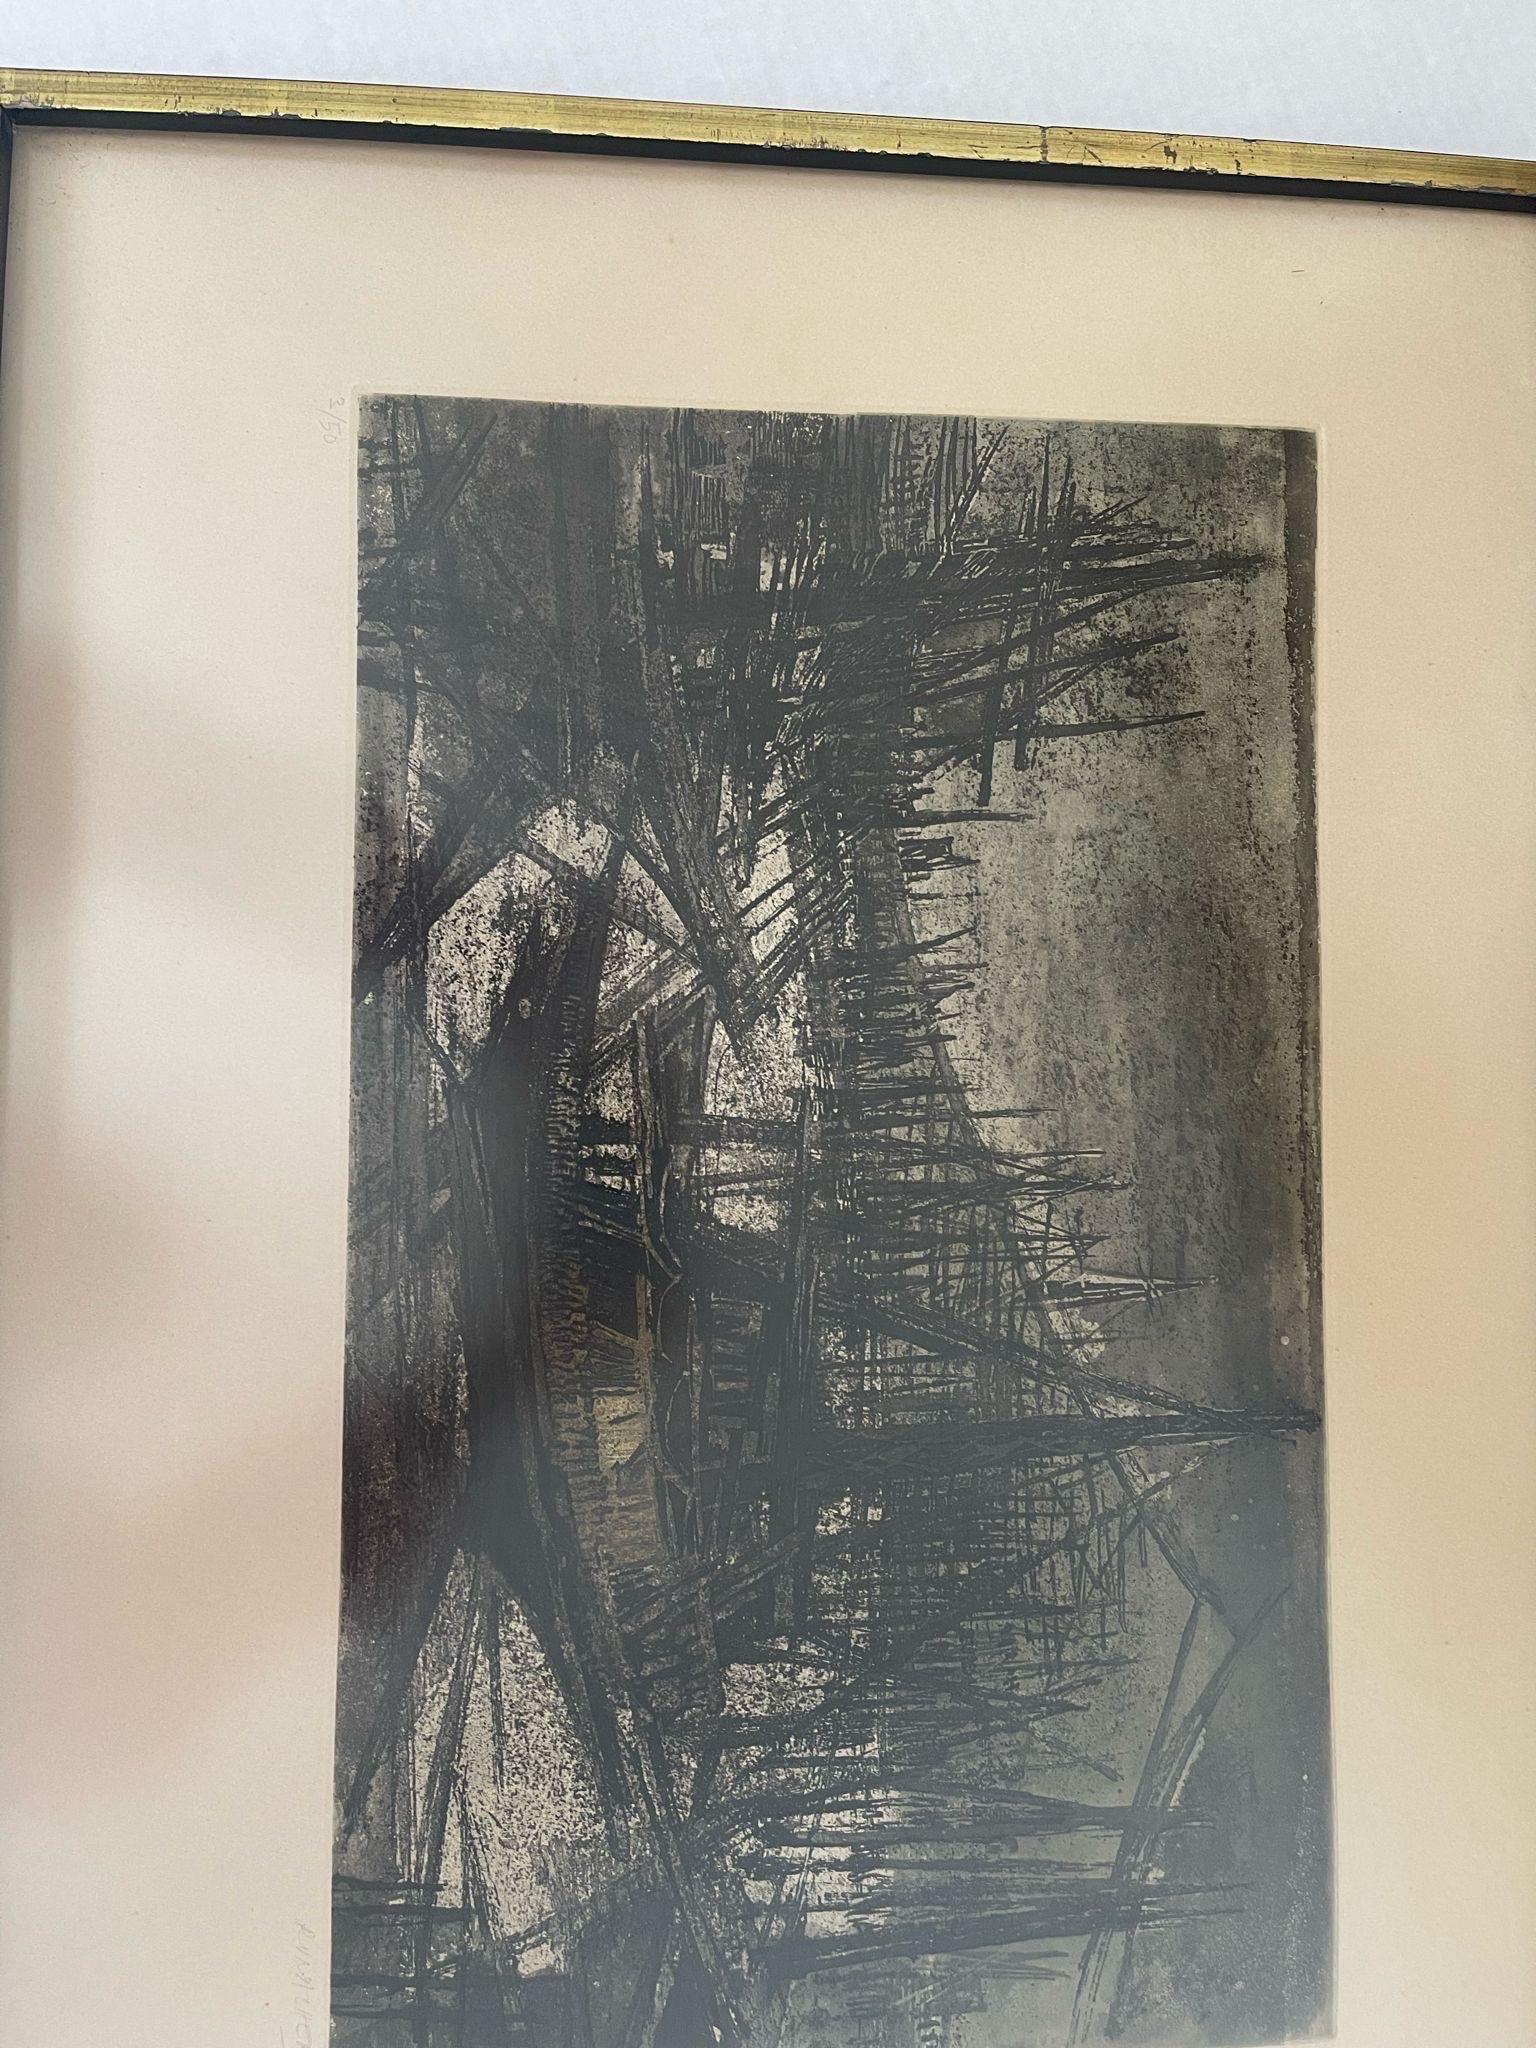 Wood Vintage Signed and Framed Etching Print by Suzanne Rauacher of Abstract sailboat For Sale